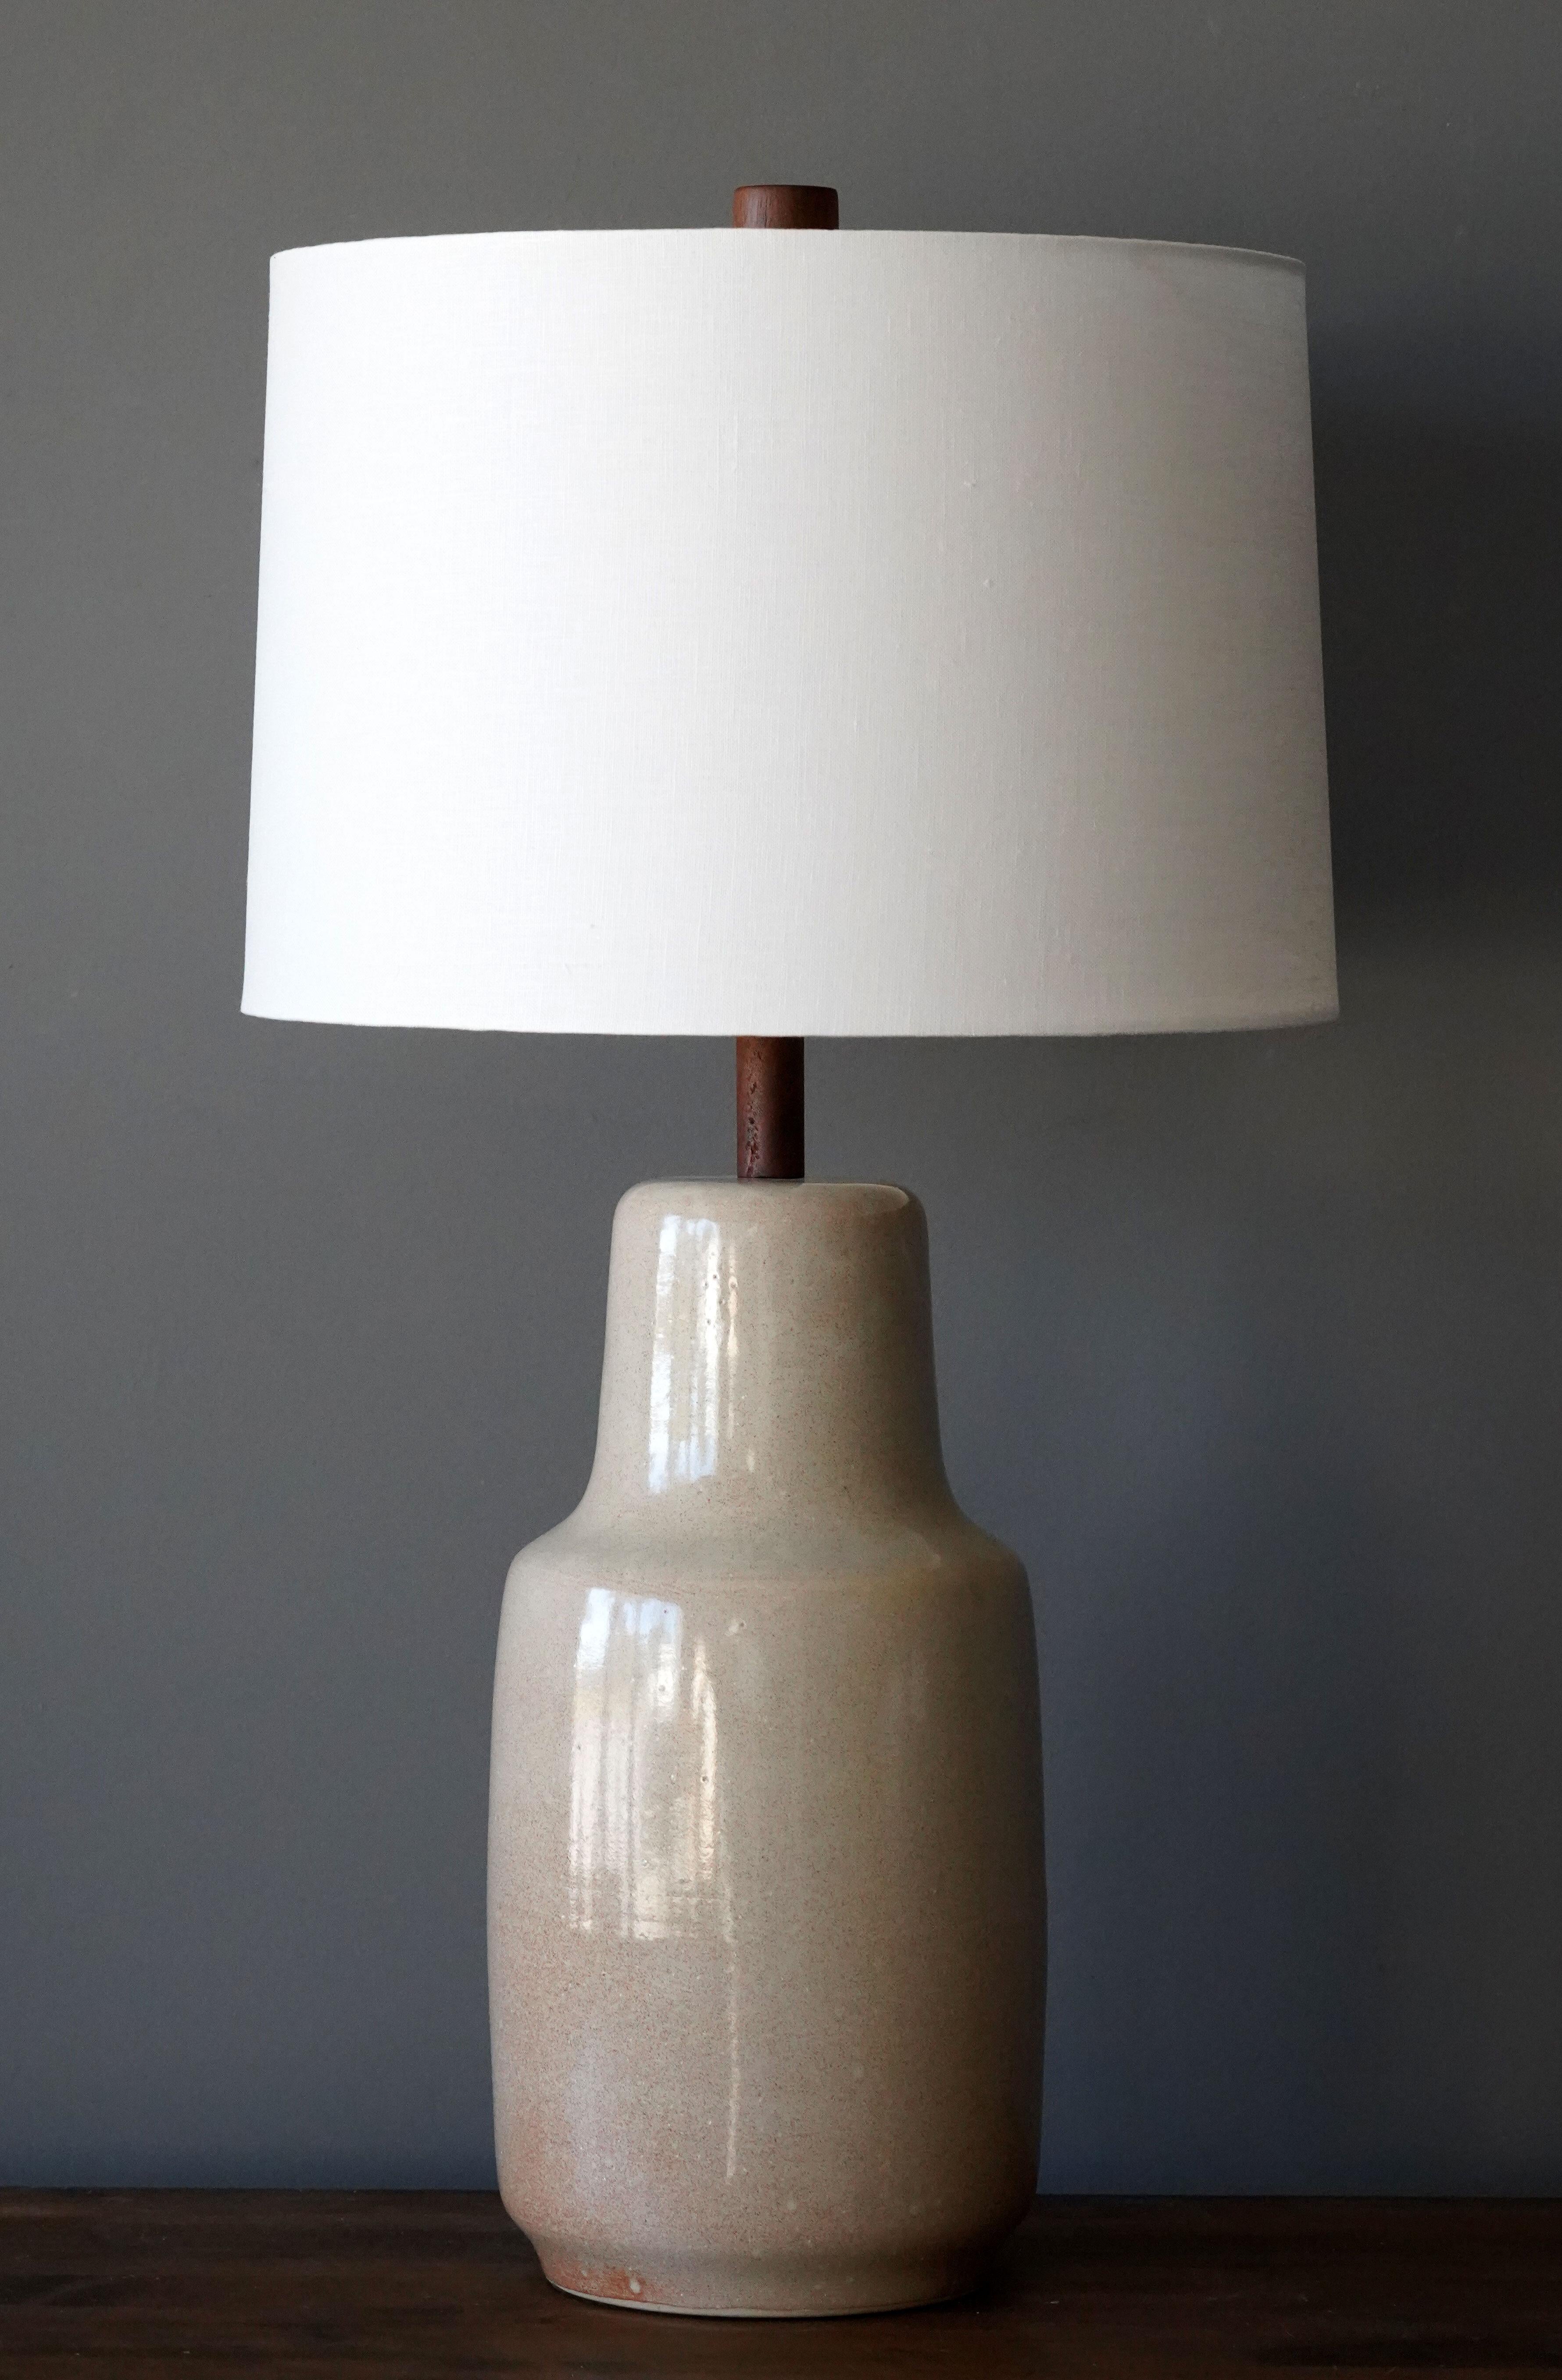 A table lamp designed by husband and wife duo Jane & Gordon Martz. Produced by Marshall Studios, Indianapolis. 

Bases are slip-cast and then dipped into glaze. Design also incorporates exquisite walnut necks and finials. Bases are signed.